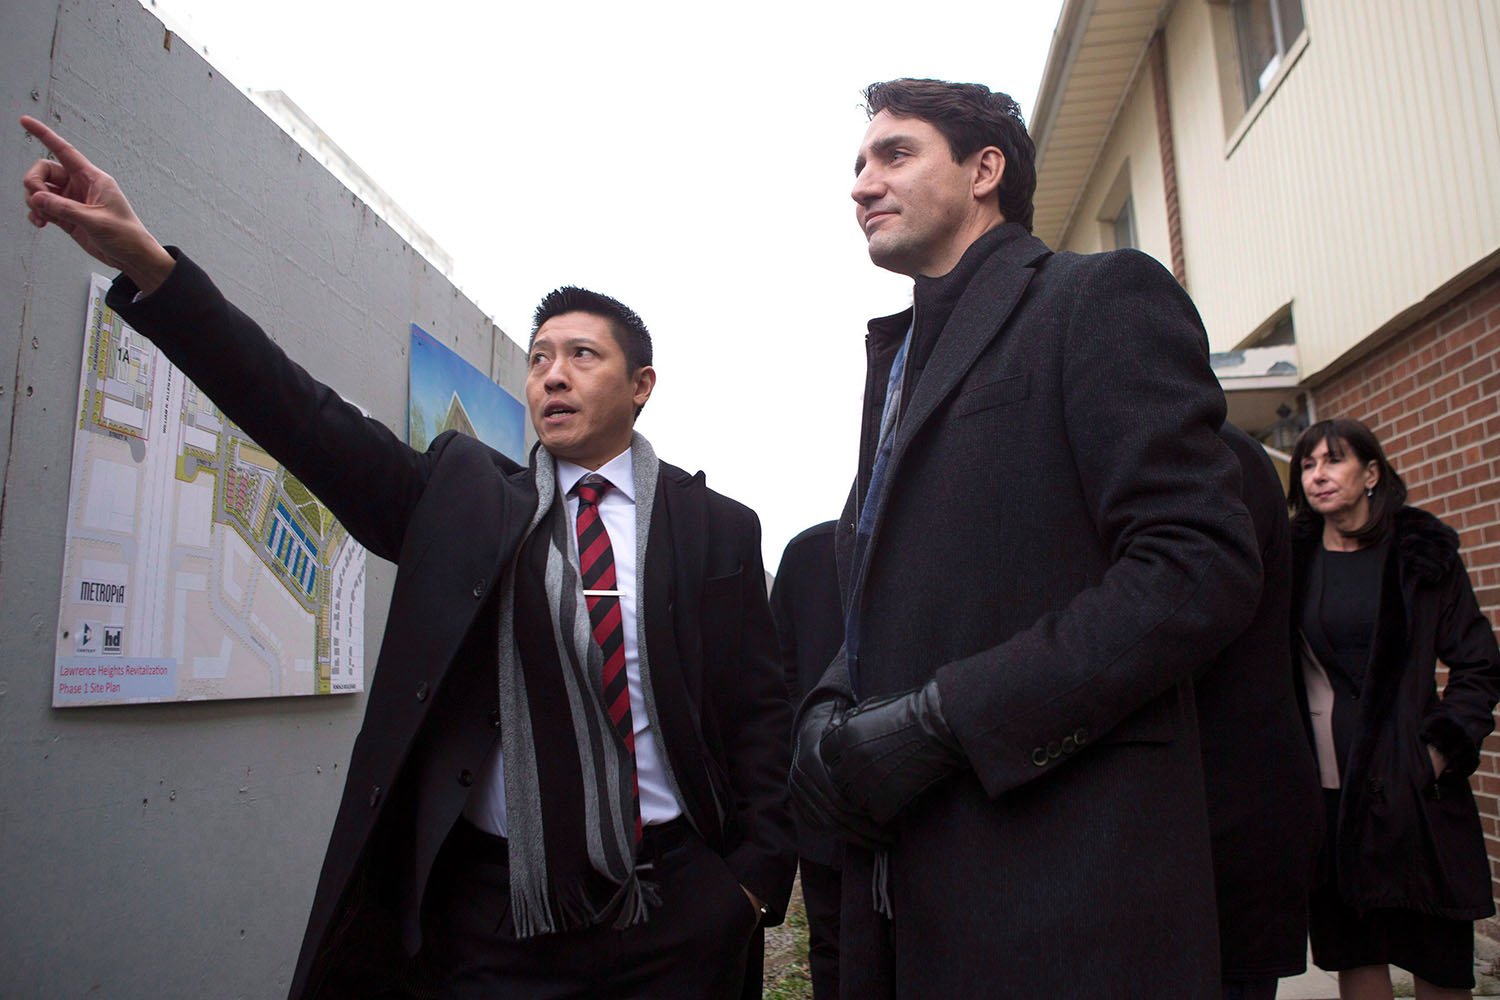 Justin Trudeau and Jason Chen visit a Toronto housing development. Chen points at something in the distance and Trudeau smiles beside him.